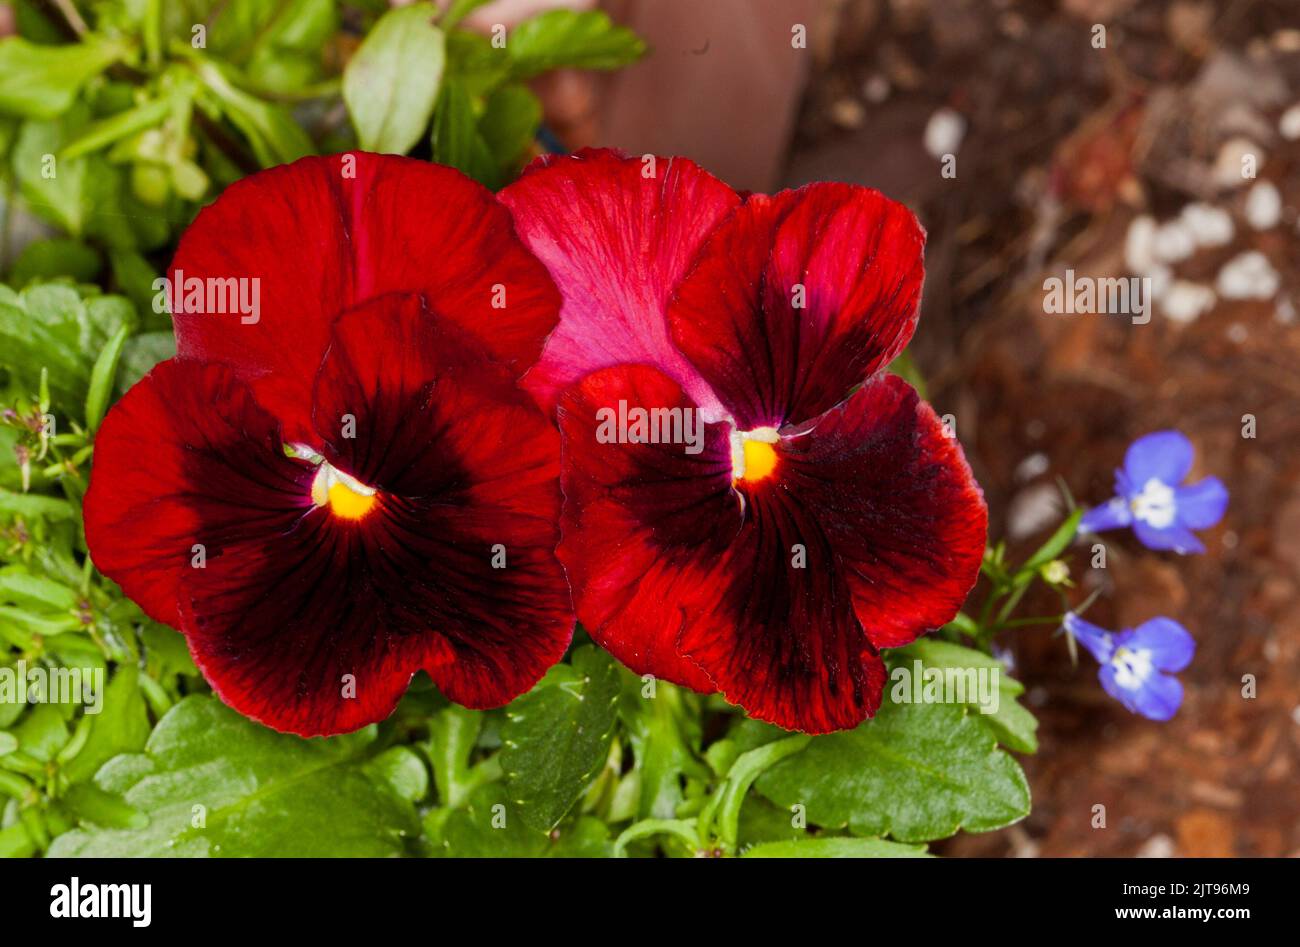 Stunning large dark red flowers of Pansy, a flowering annual, on background of emerald green leaves Stock Photo